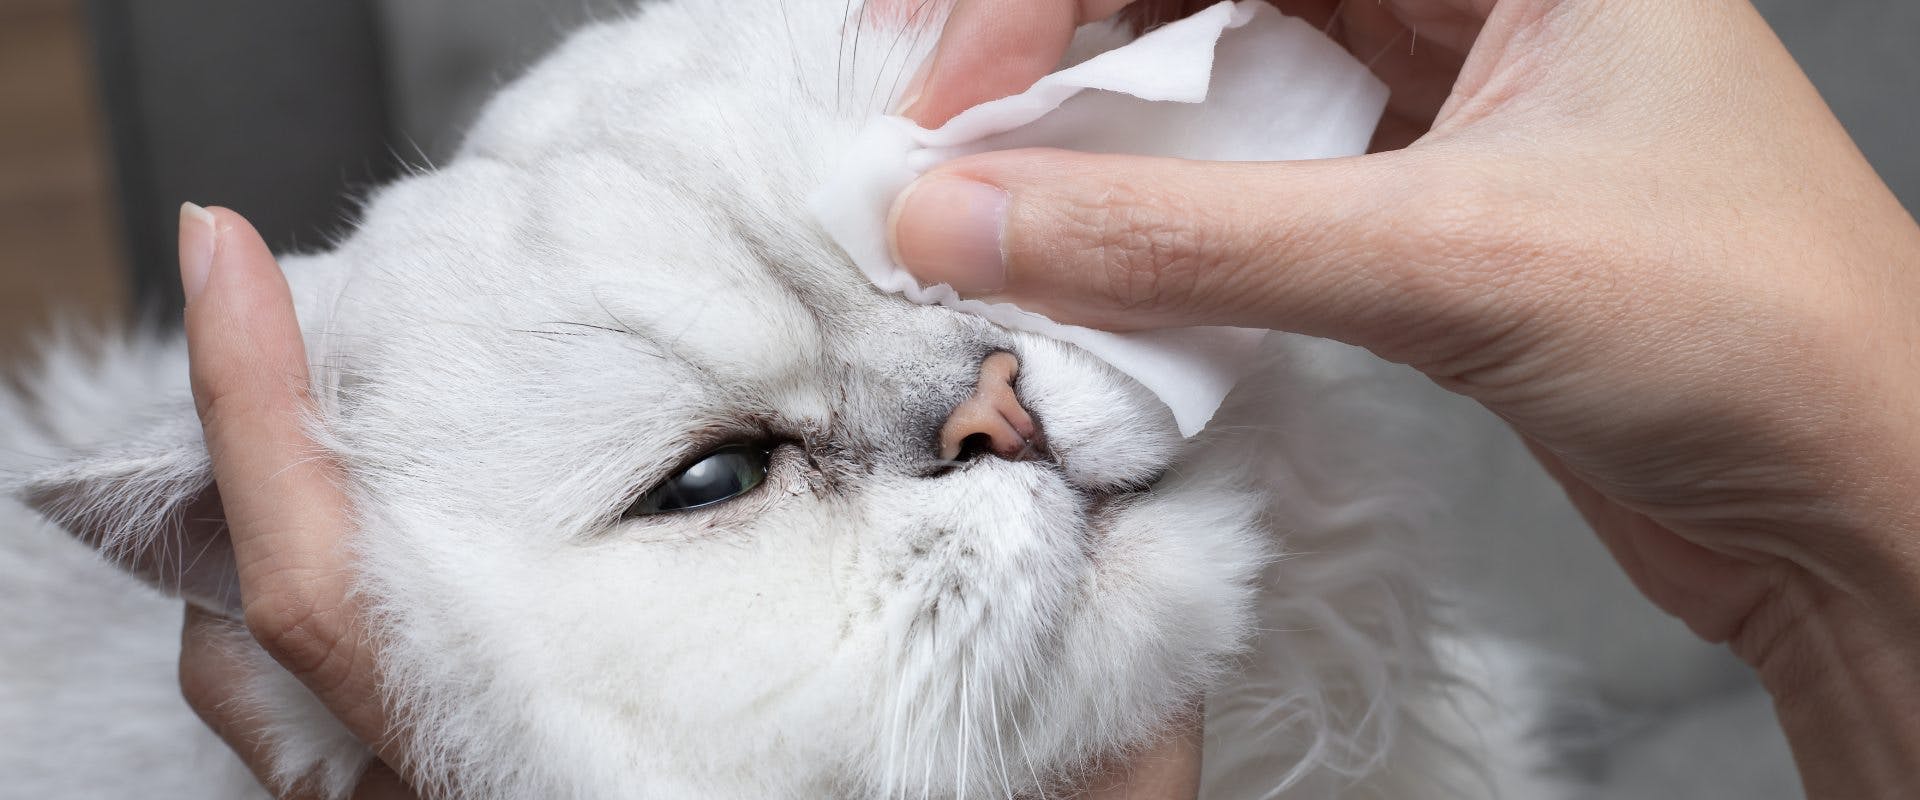 Cat having their eye cleaned by pet parent.